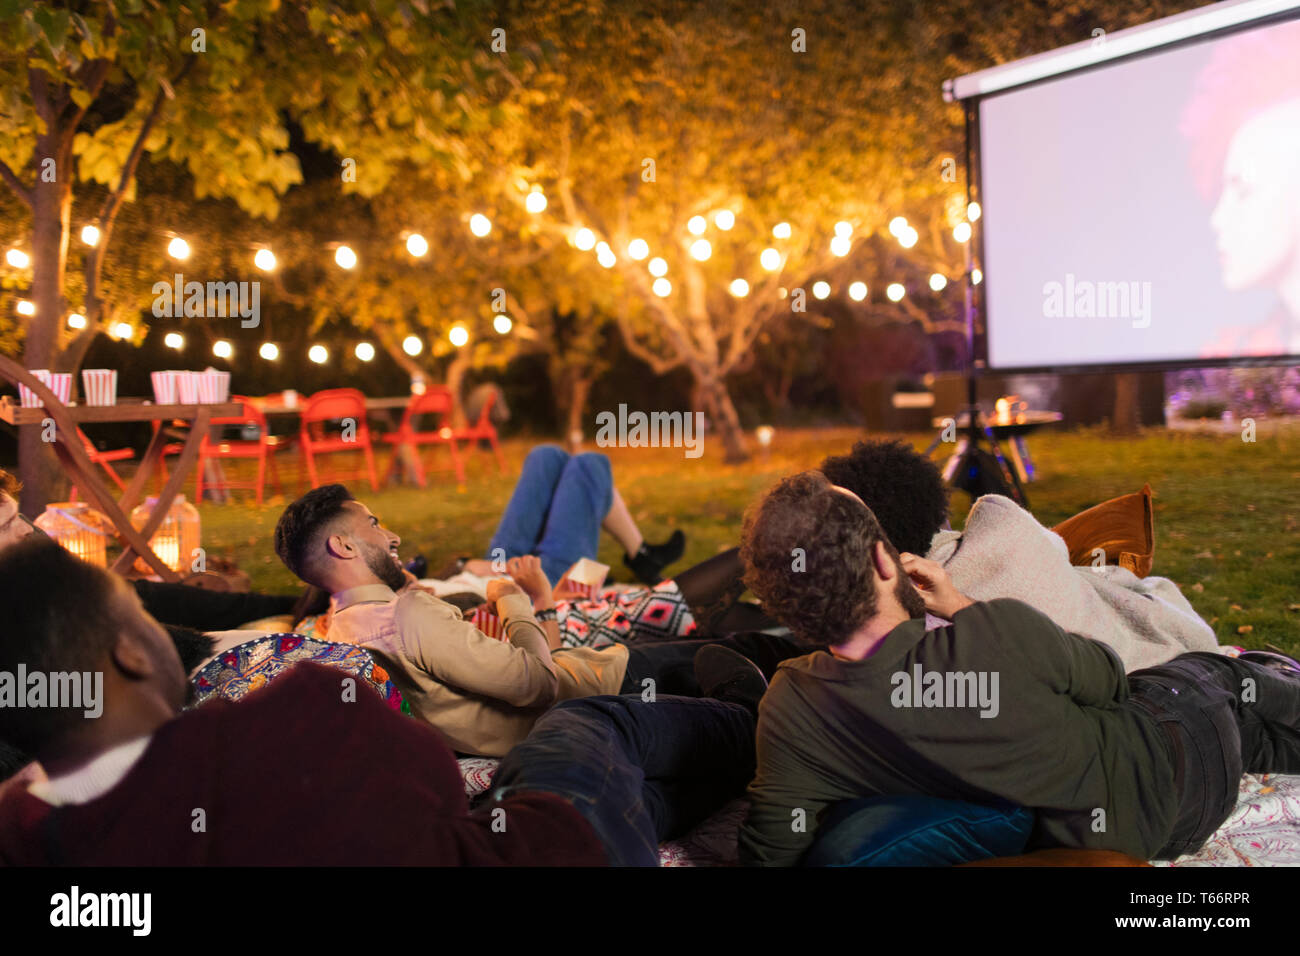 Friends relaxing, watching movie on projection screen in backyard Stock Photo